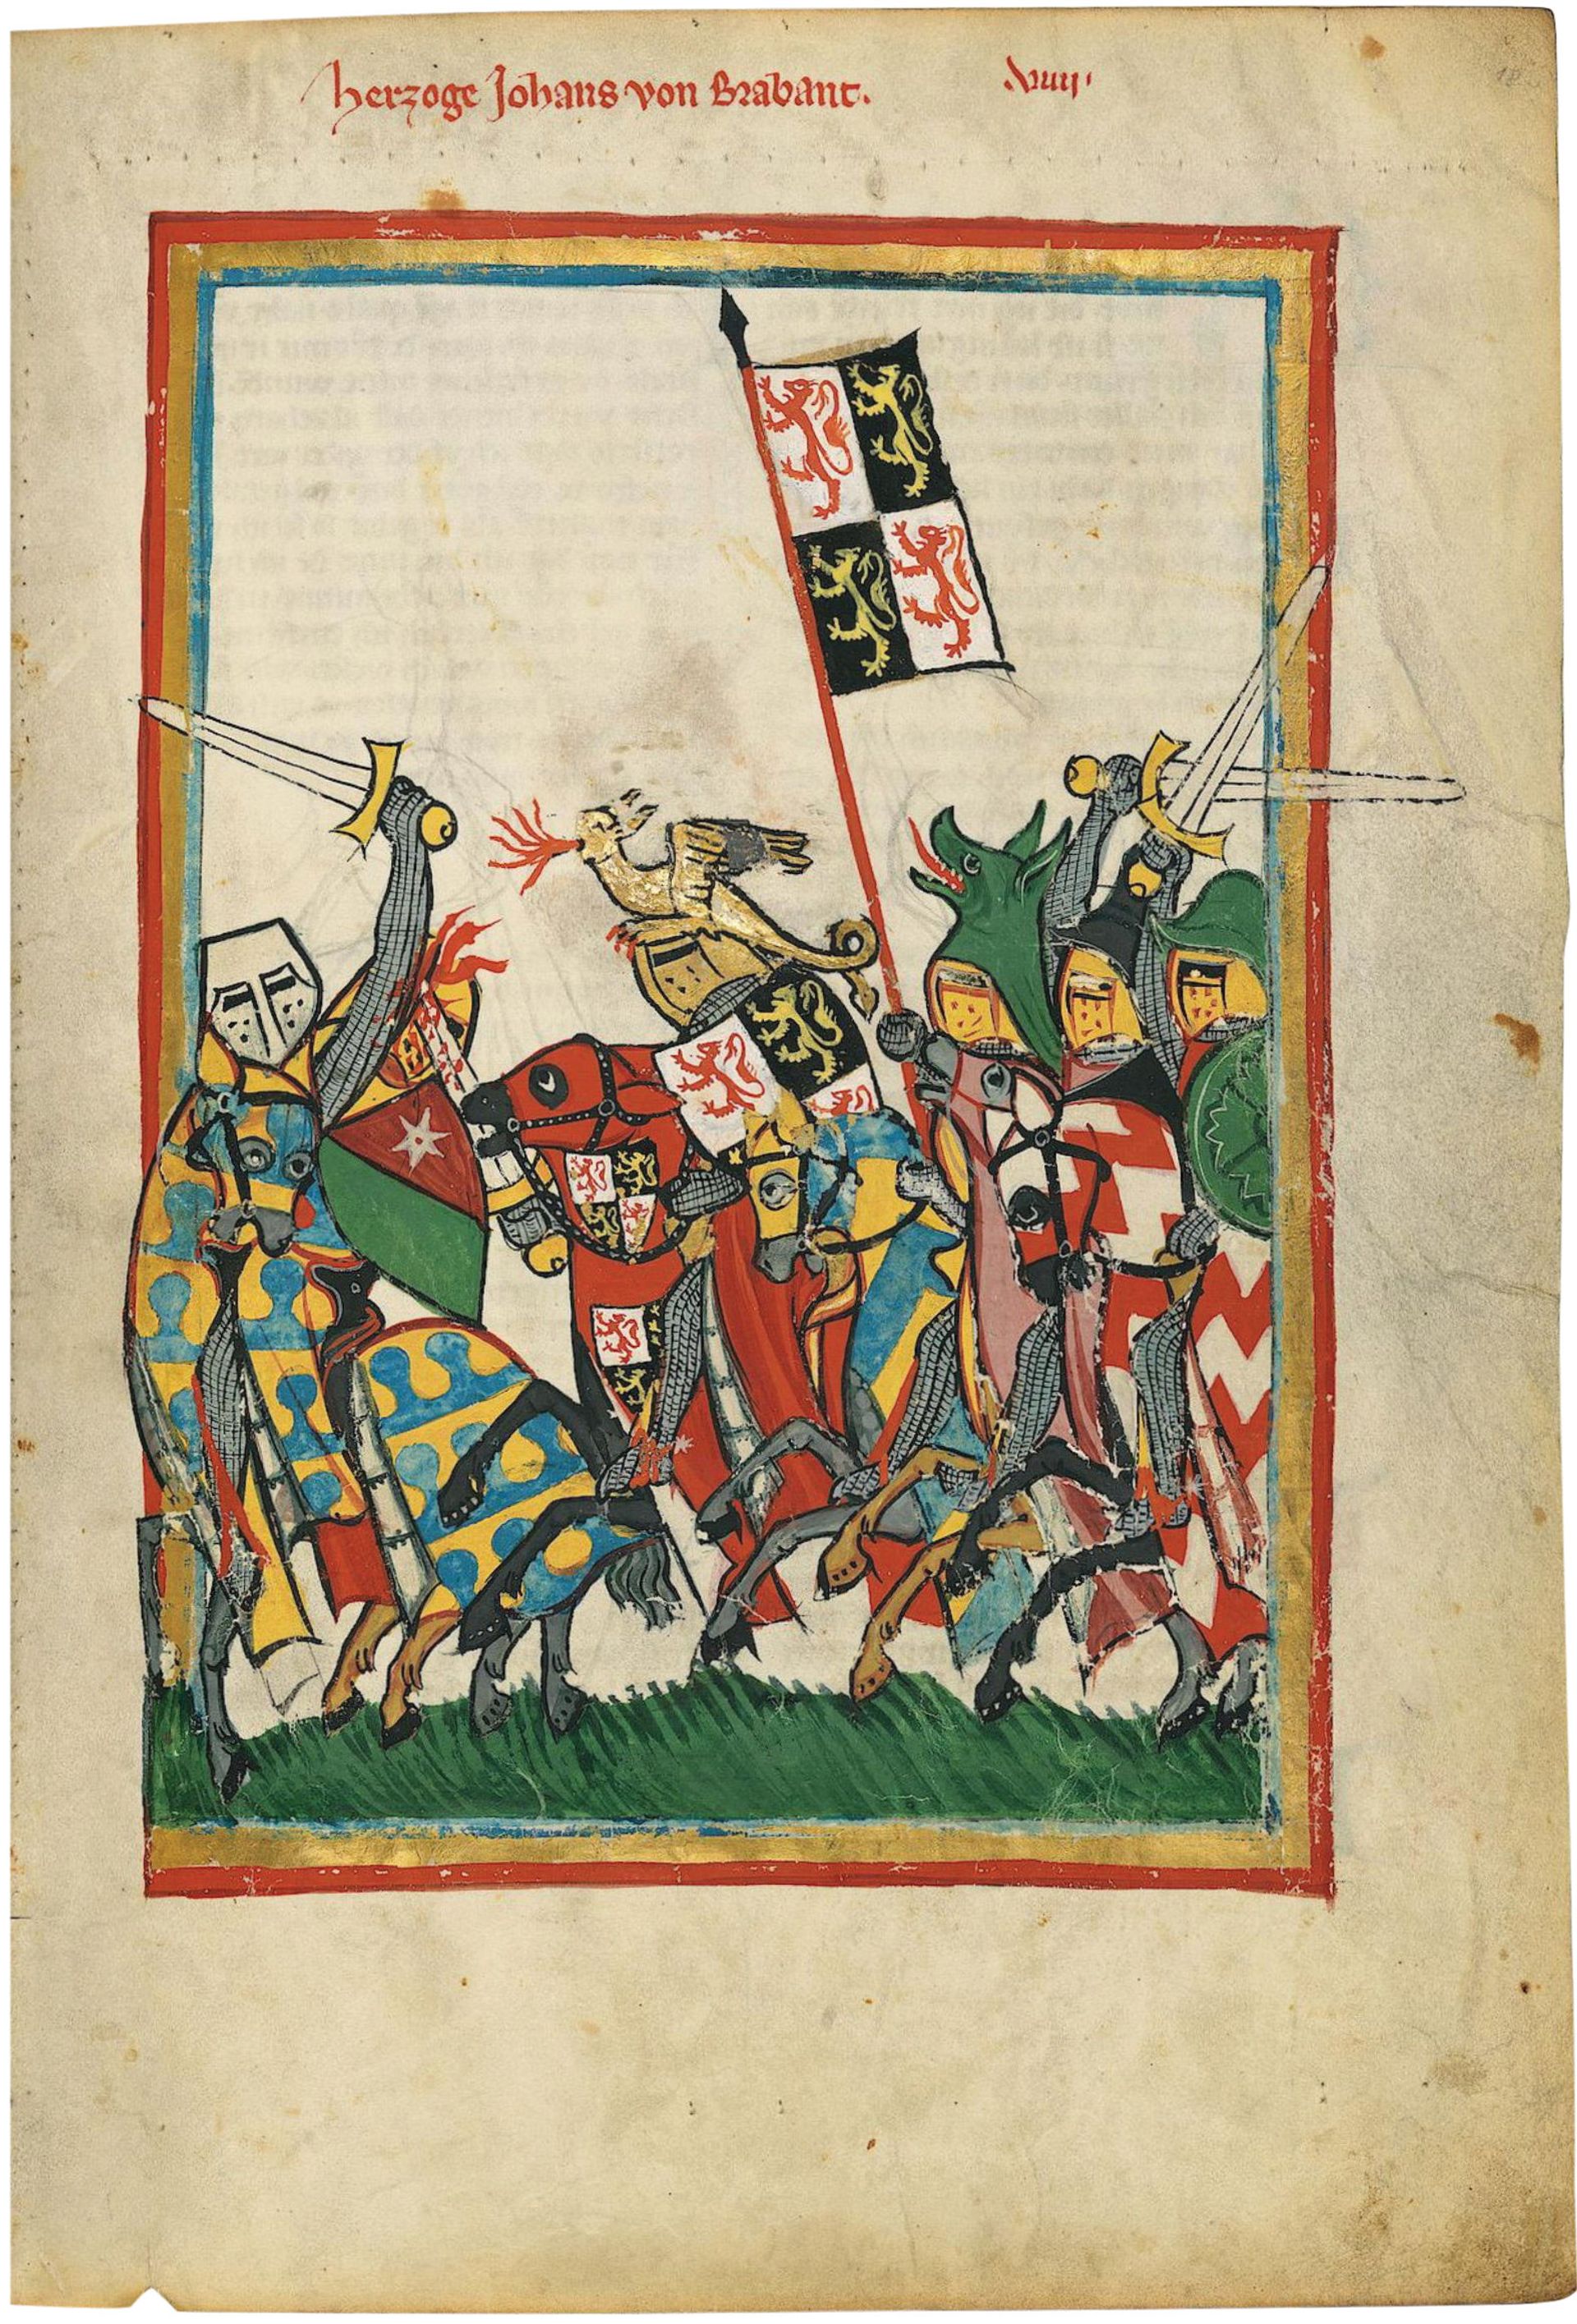 An illustration from the 14th-century Codex Manesse of John, Duke of Brabant, who was killed in a tournament at Bar in north-eastern France in 1294 Heidelberg University Library